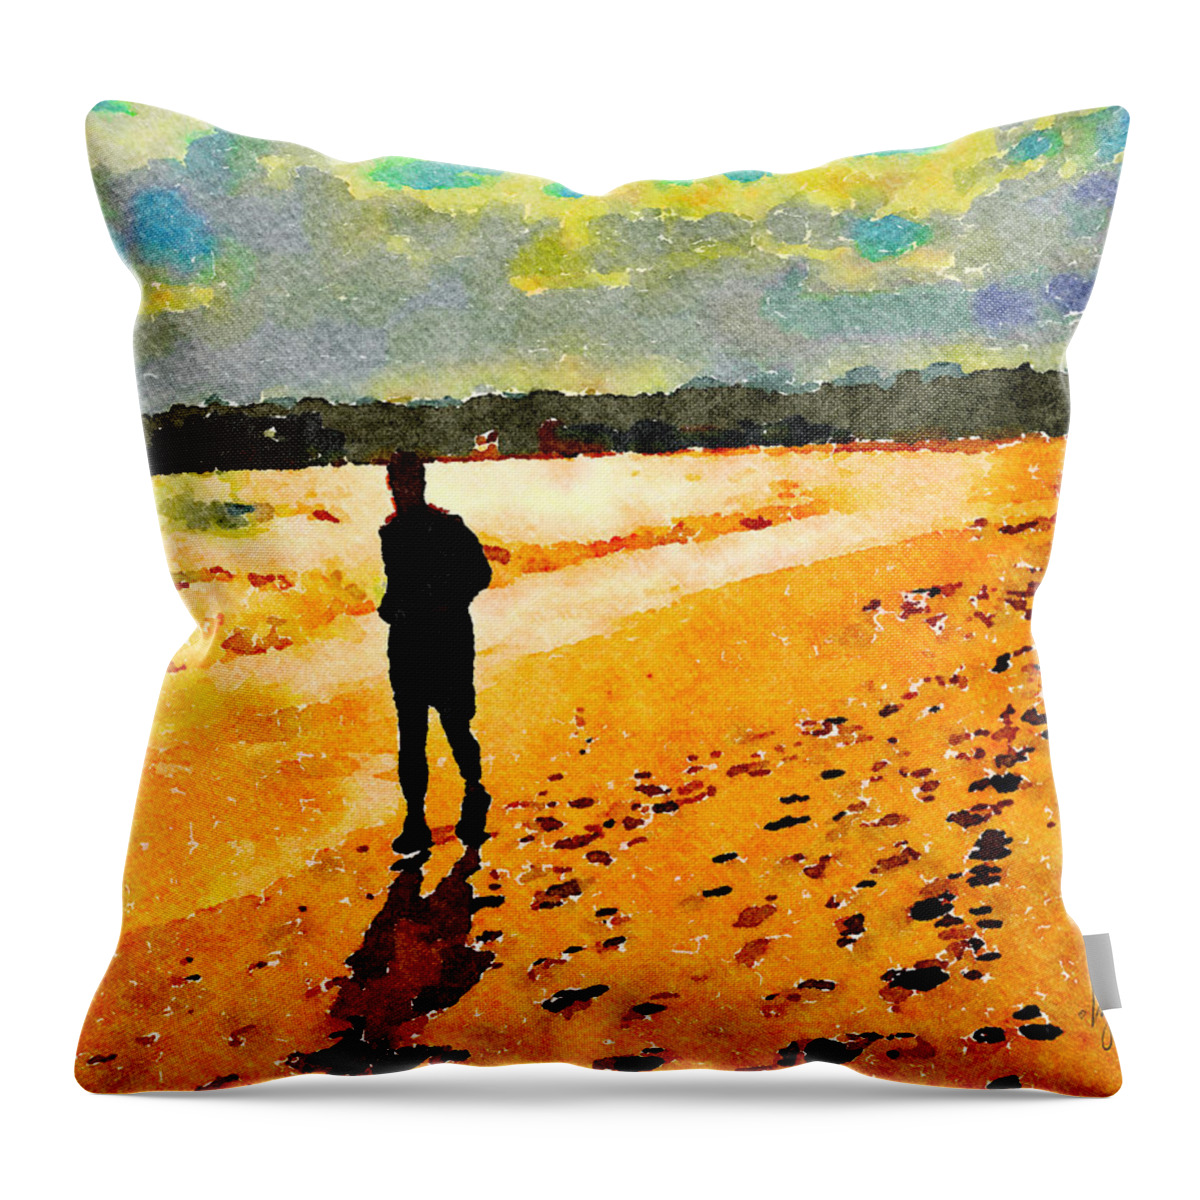 Runner Throw Pillow featuring the painting Running in the Golden Light by Angela Treat Lyon